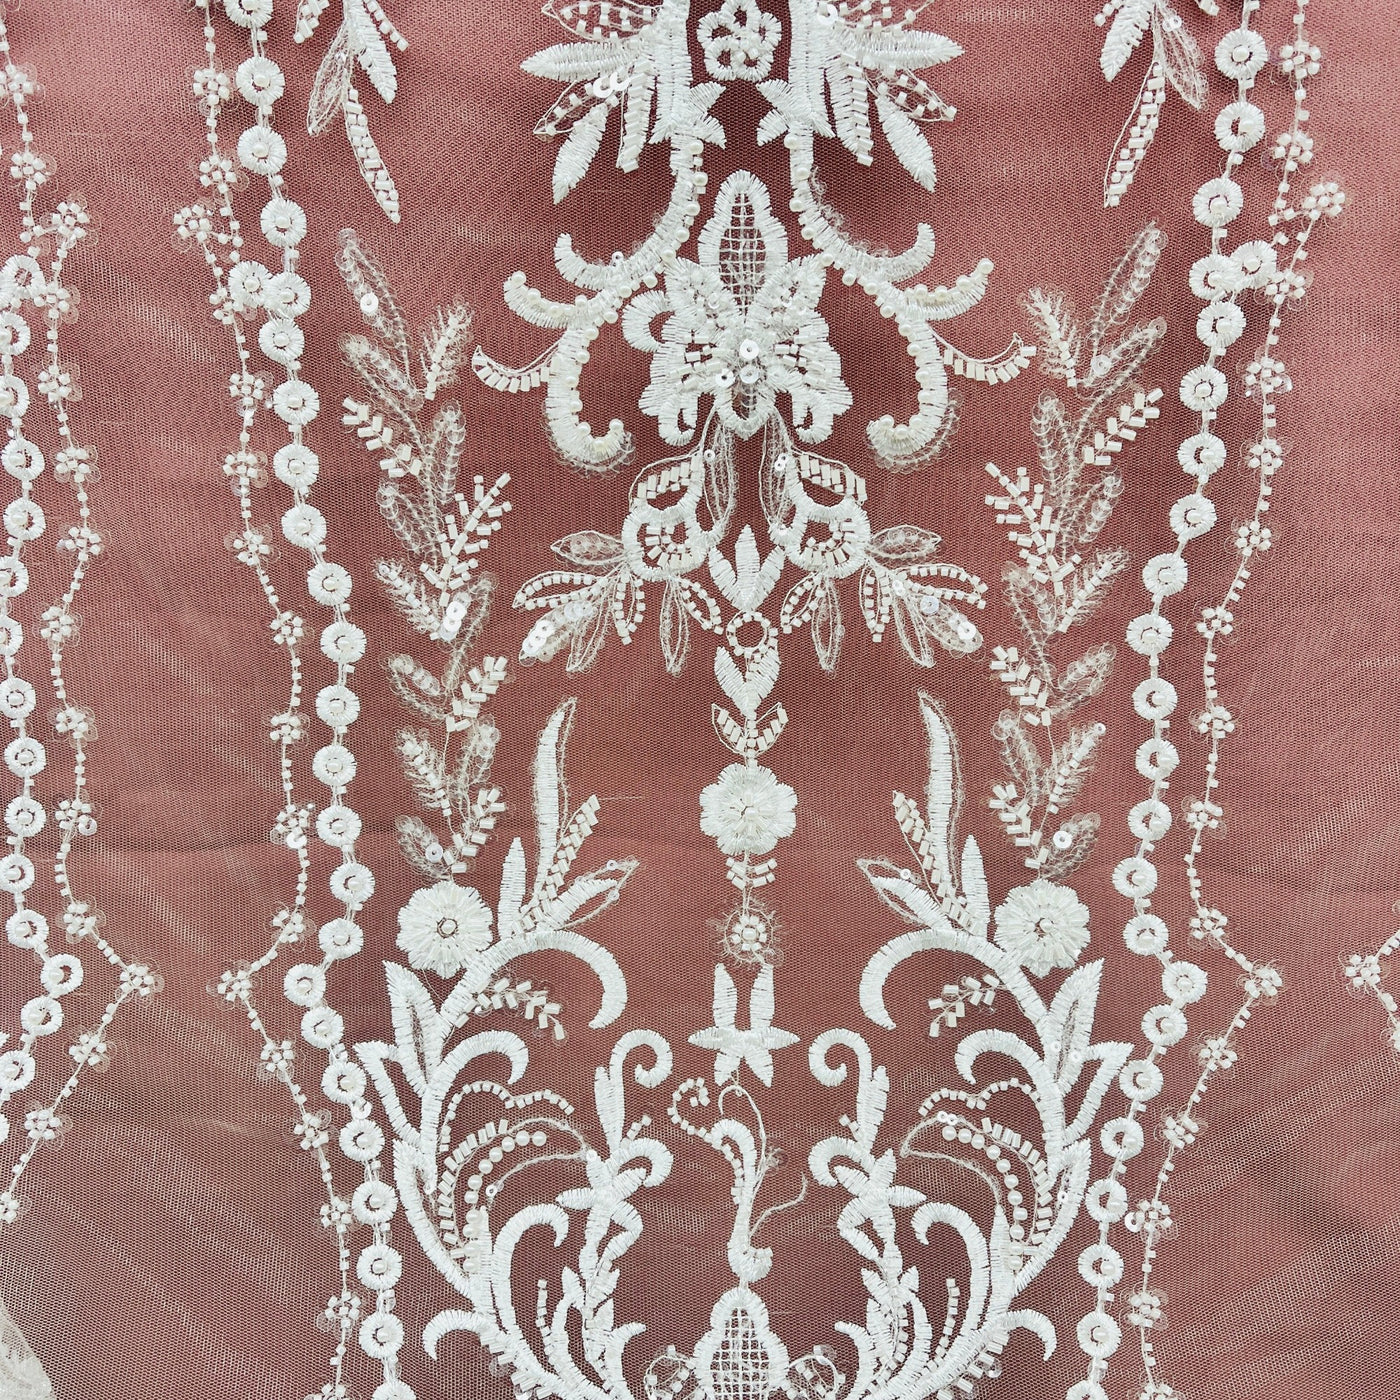 Beaded Lace Fabric Embroidered on 100% Polyester Net Mesh | Lace USA - GD-237341